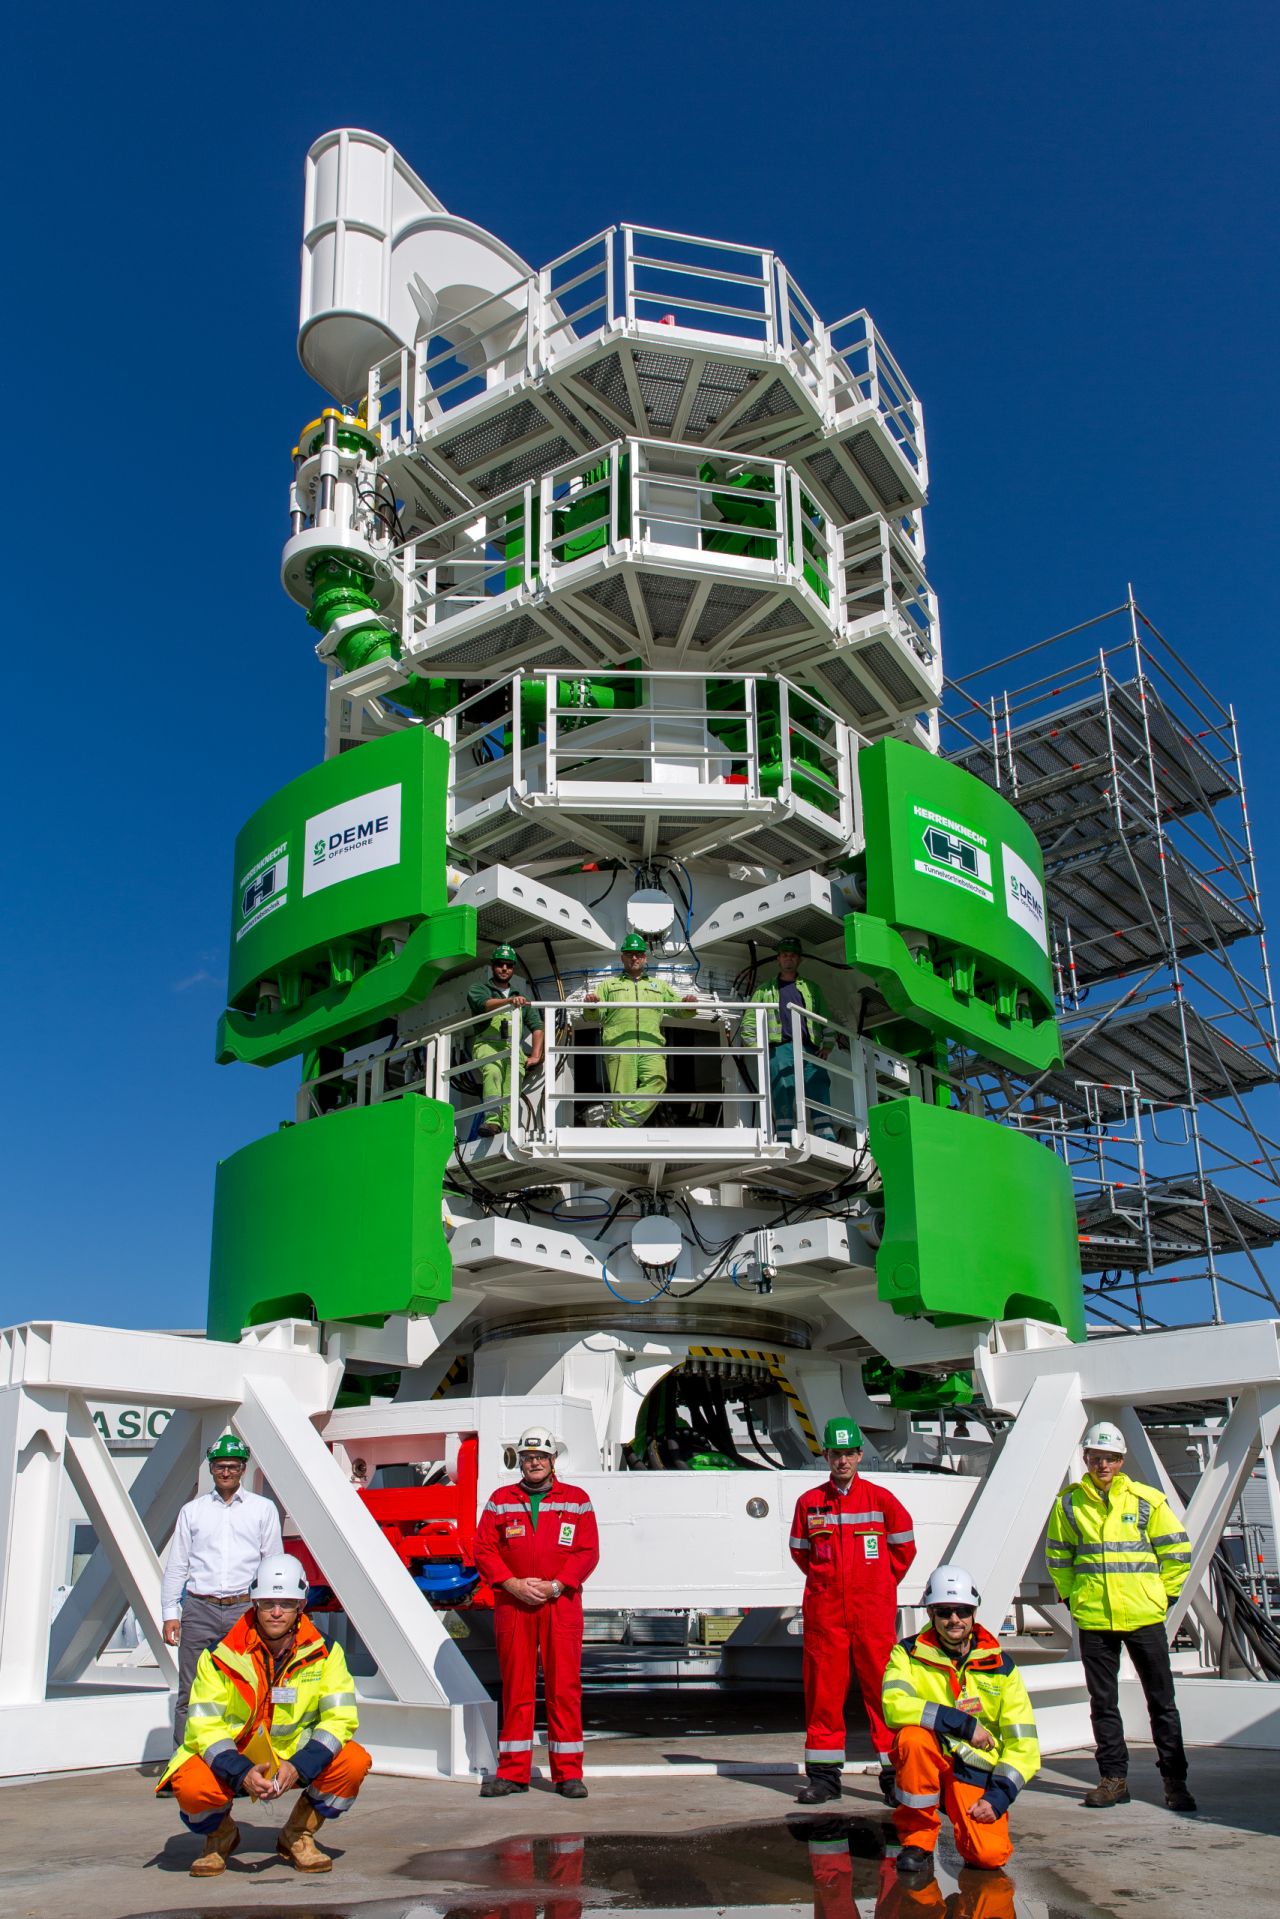 The subsea drill system in DEME's signature green color